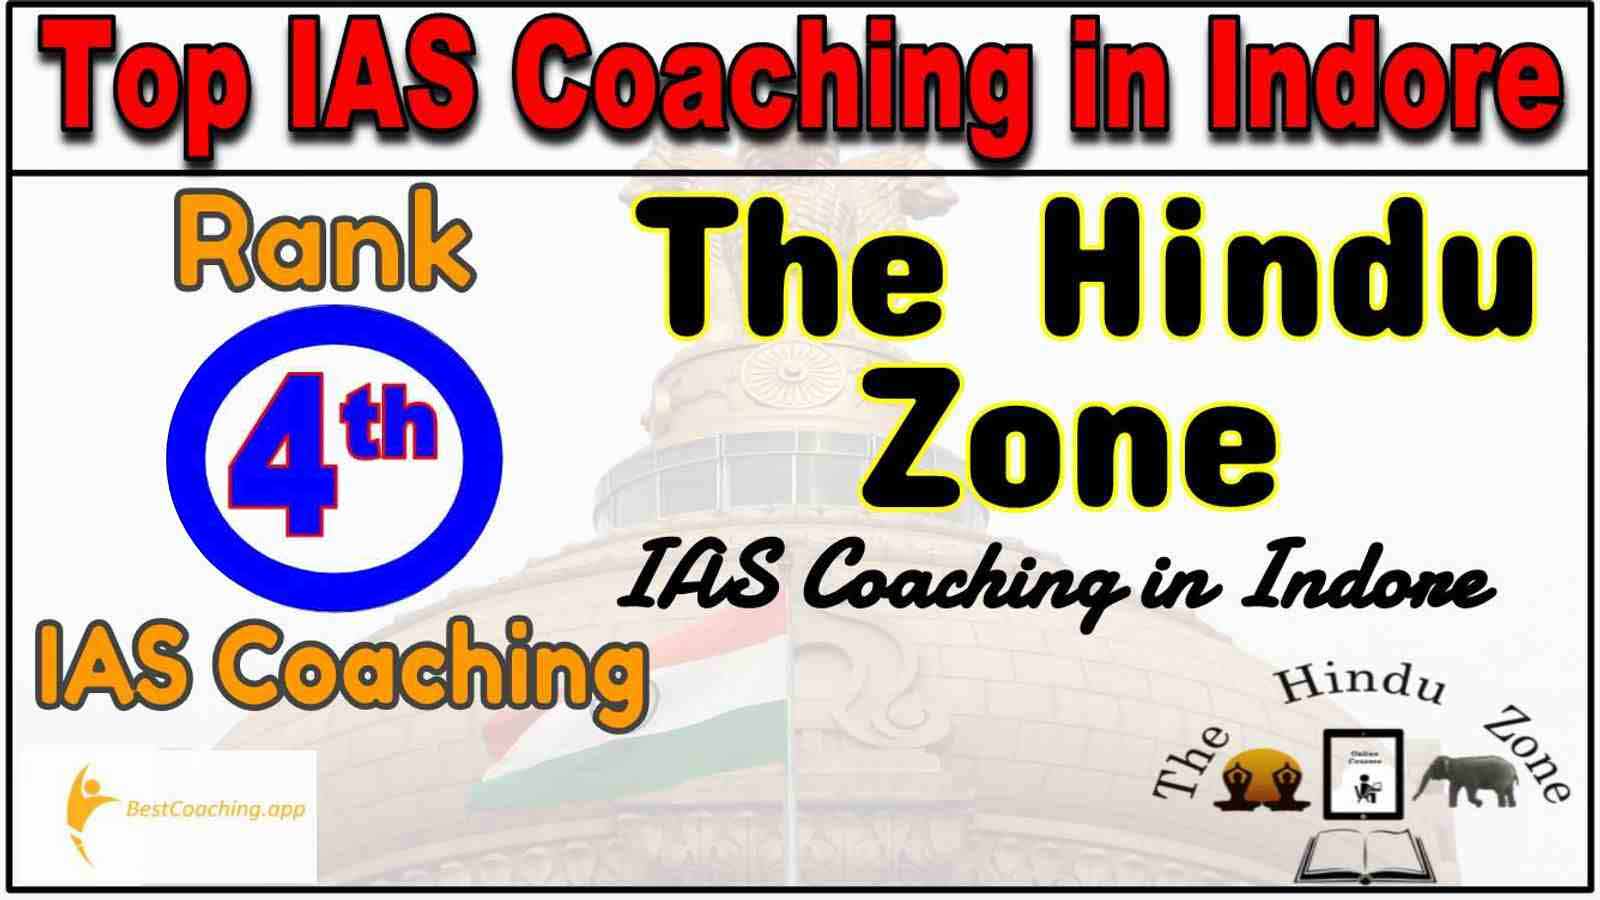 Rank 4 Best IAS Coaching in Indore